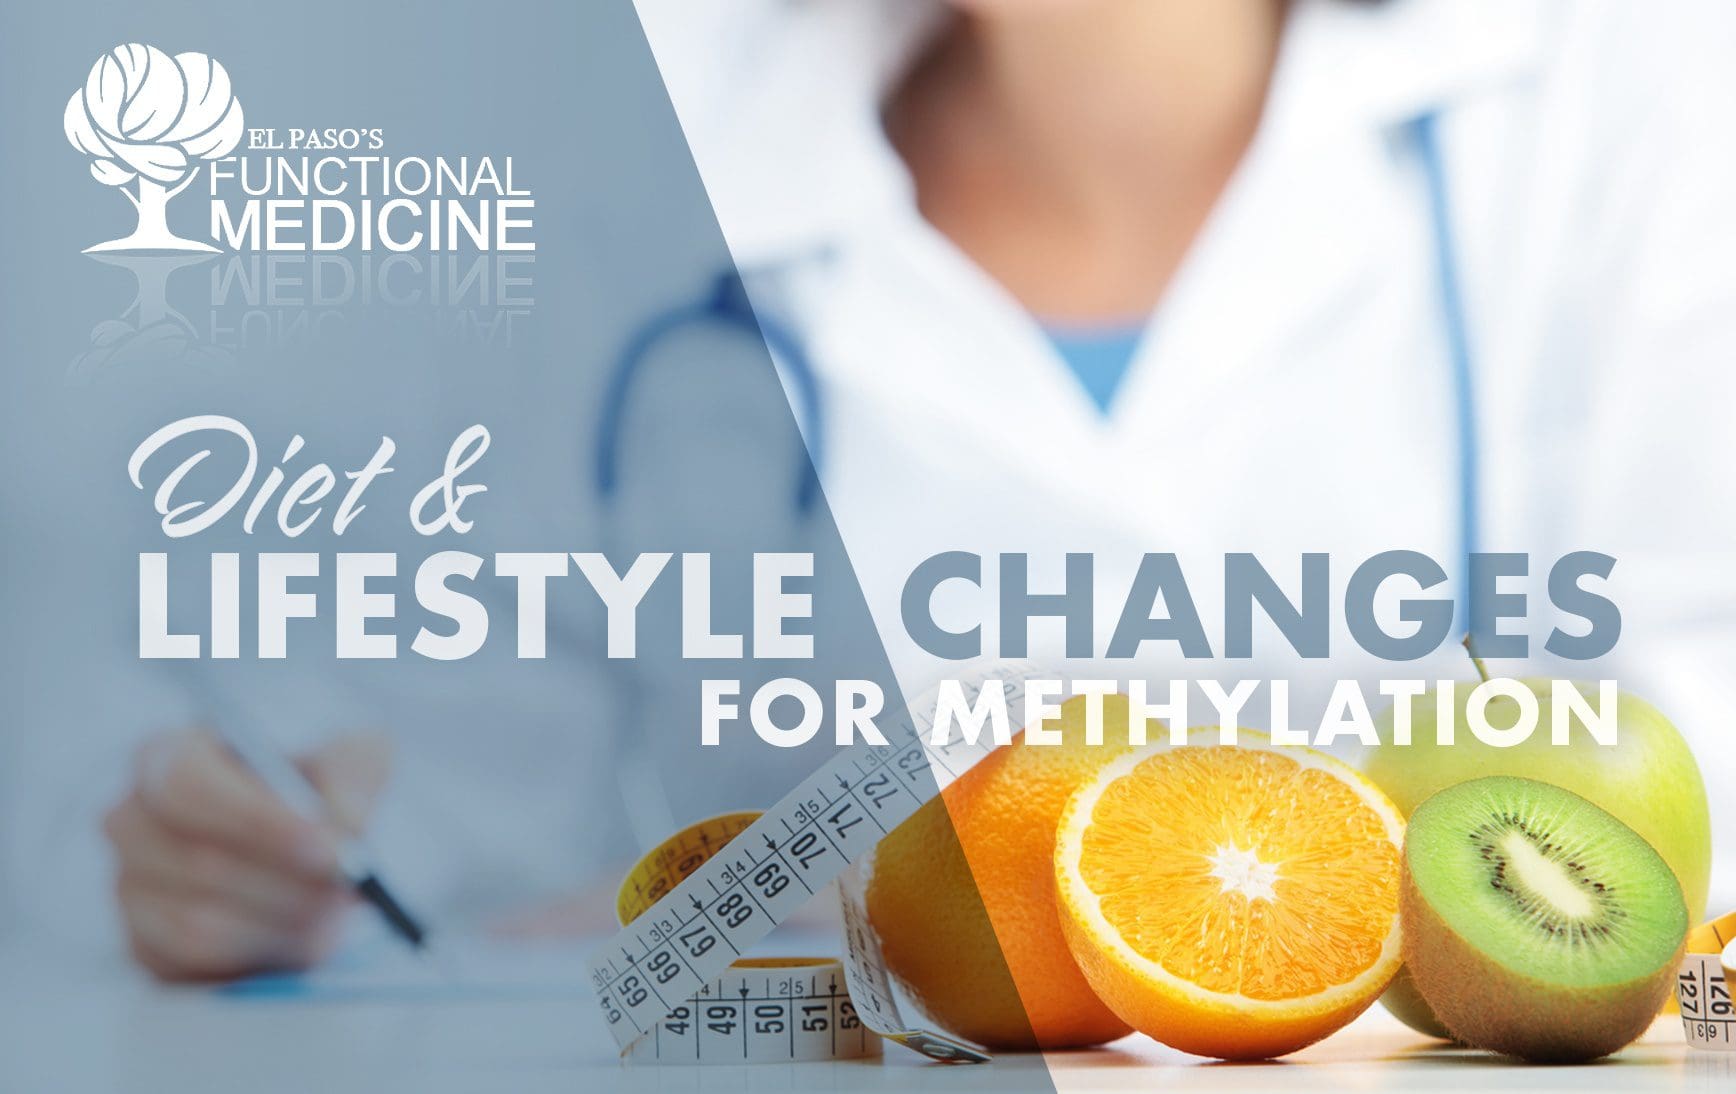 Diet and Lifestyle Changes for Methylation | El Paso, TX Chiropractor